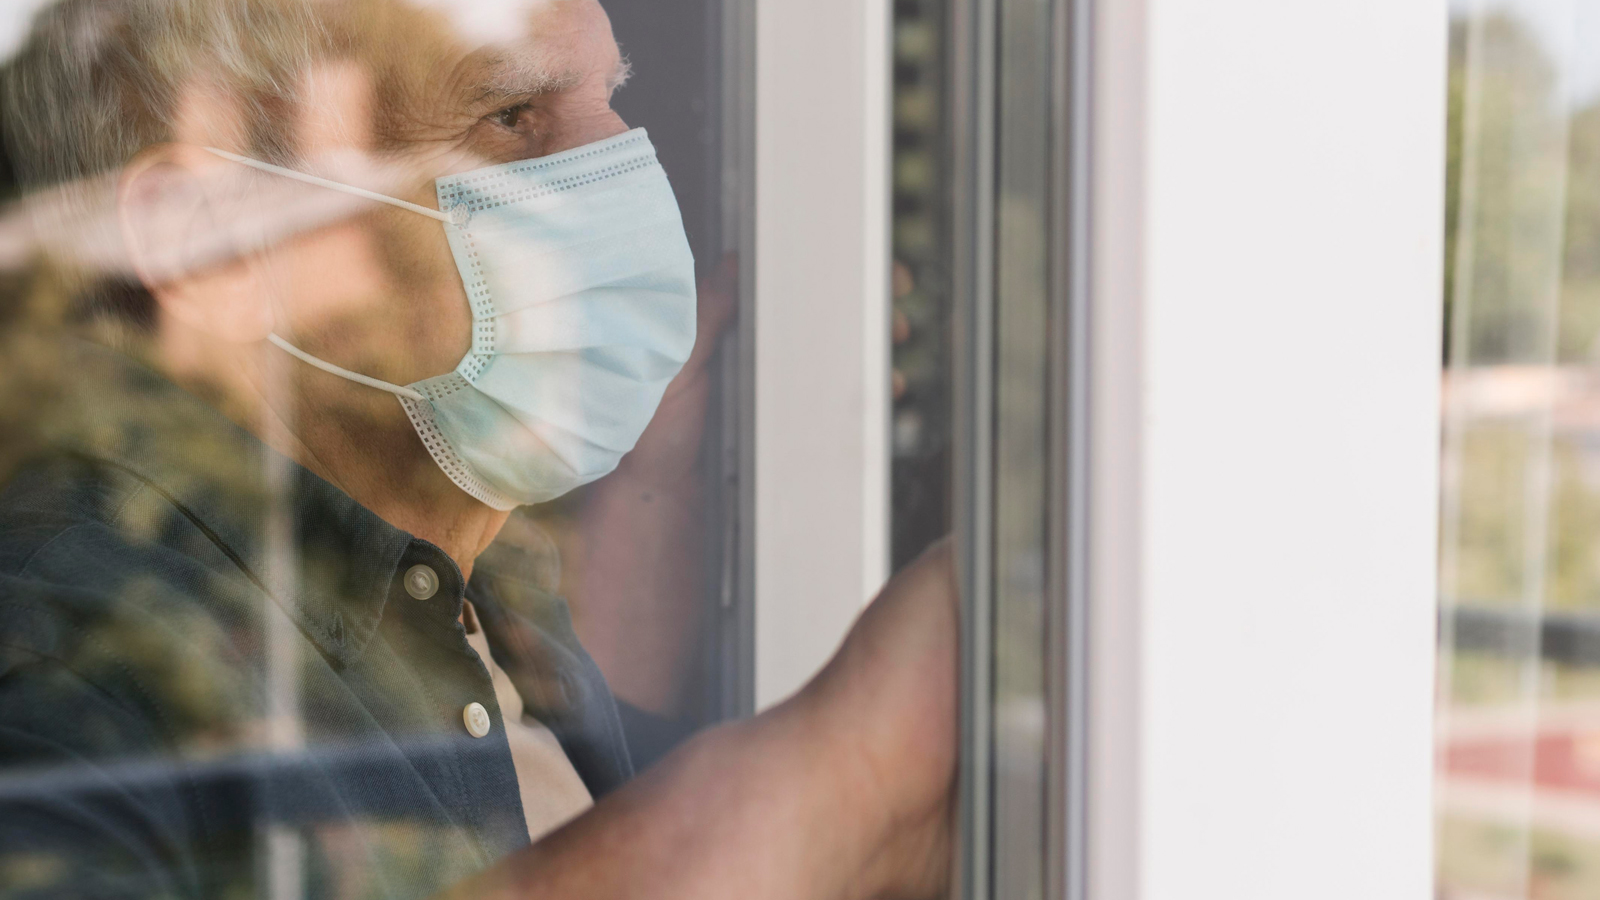 <h5>OUR REPORTS</h5><h4>PPE SHORTAGES</h4><p>Seven months into the pandemic, 20 percent of homes lacked enough supplies</p><p><a href="/feature/usf/nursing-home-safety-during-covid-ppe-shortages" style='text-decoration:underline!important;'>Learn more</a></p>